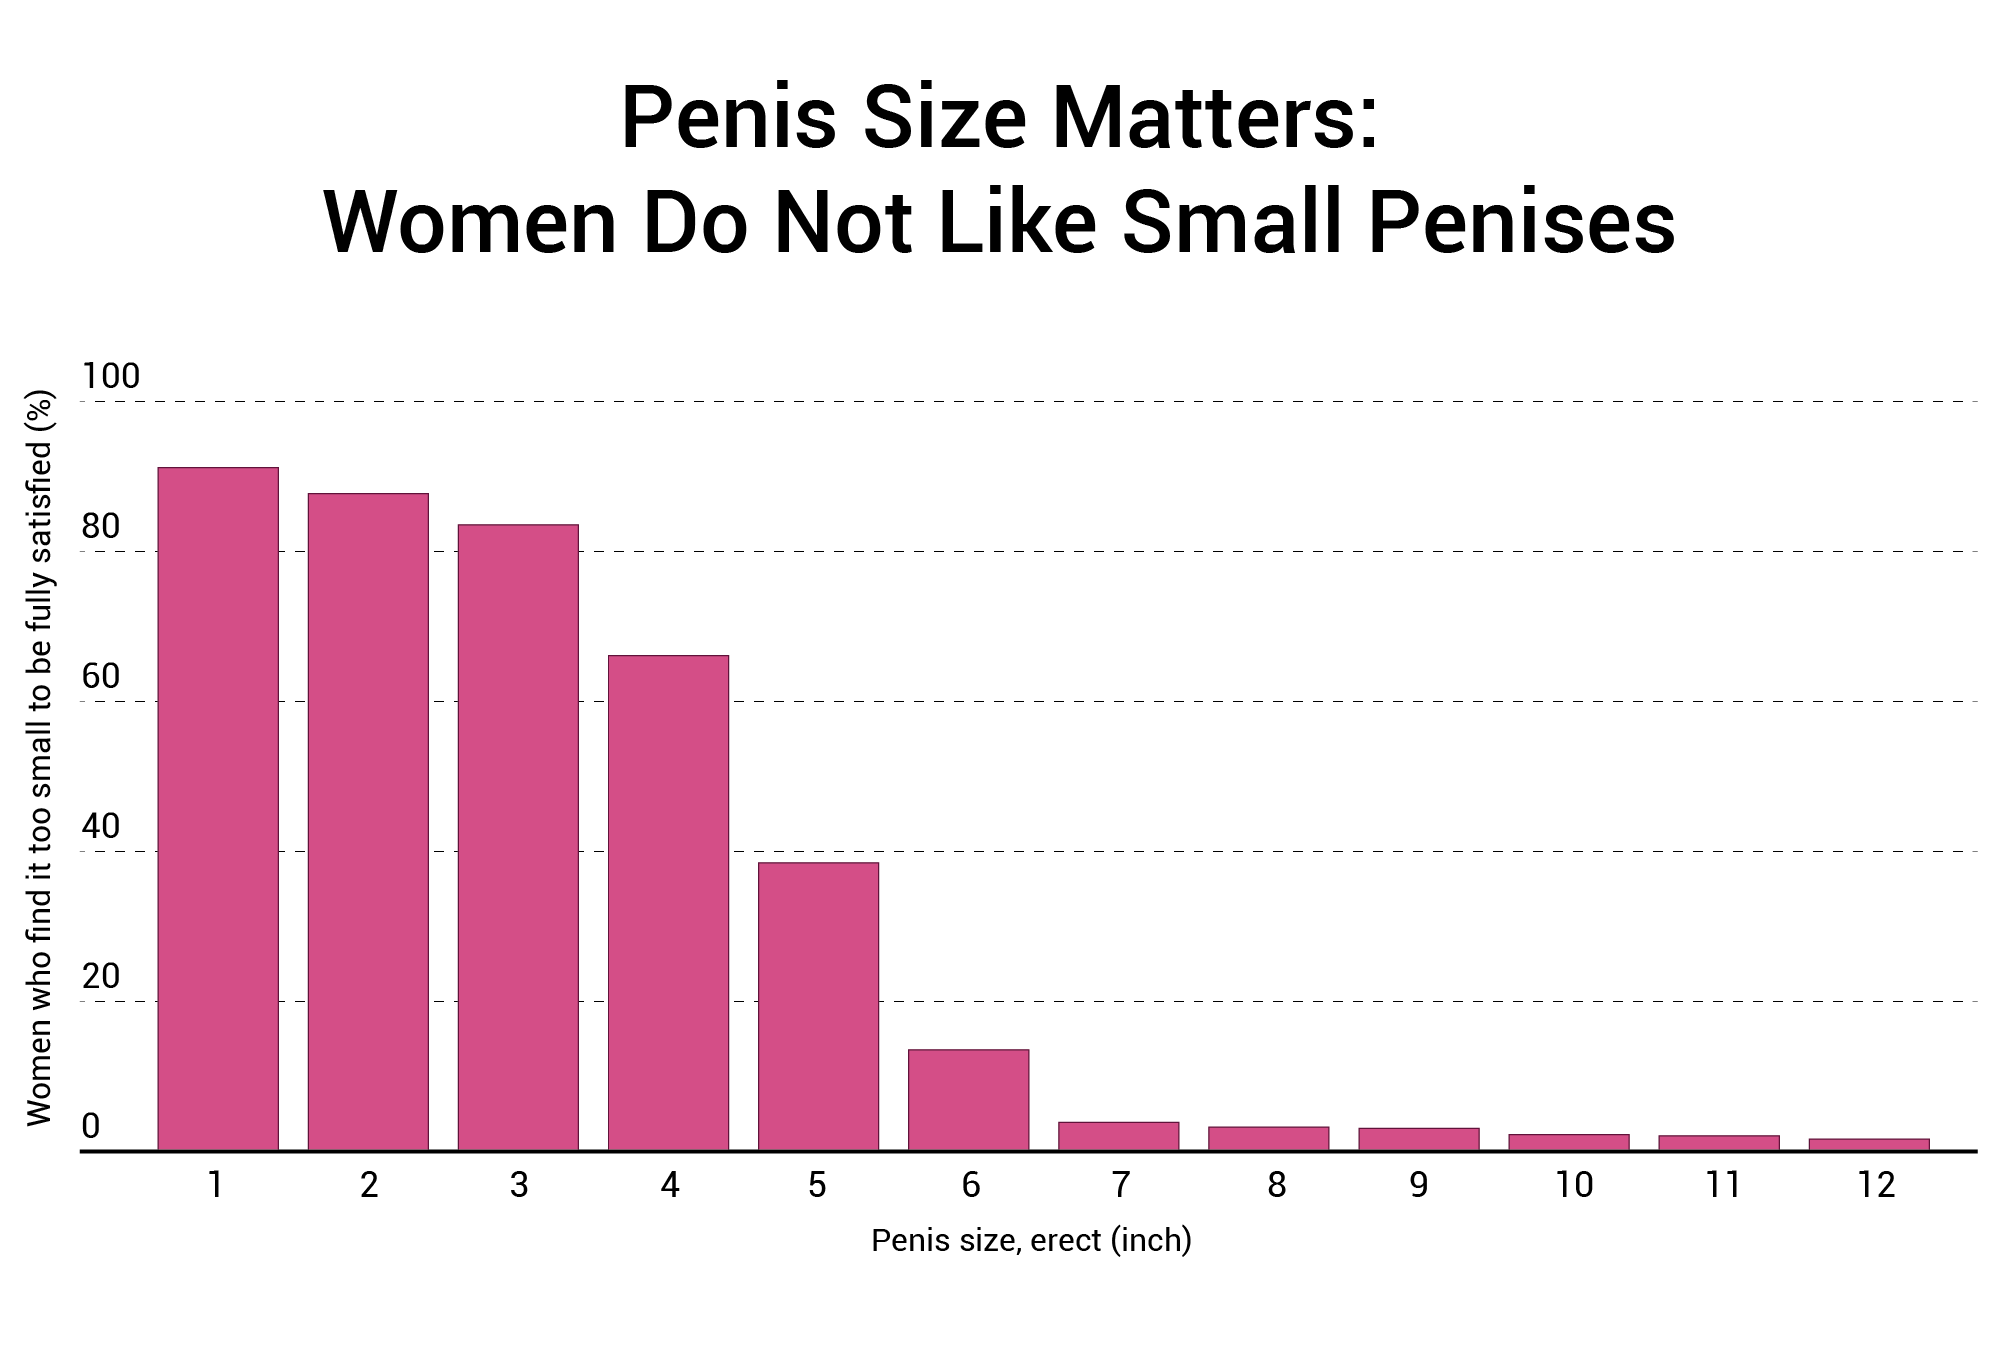 penis-size-matters-women-do-not-like-small-penises.png